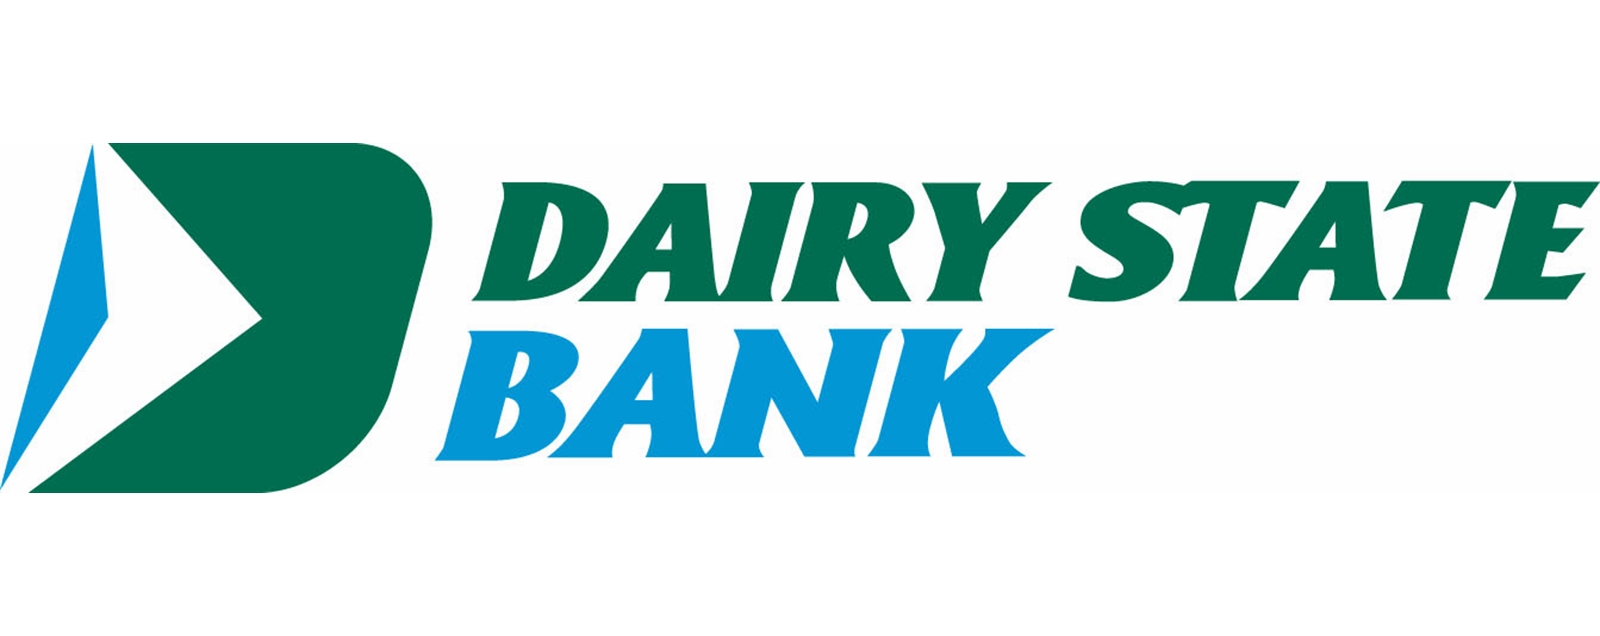 Dairy State Bank